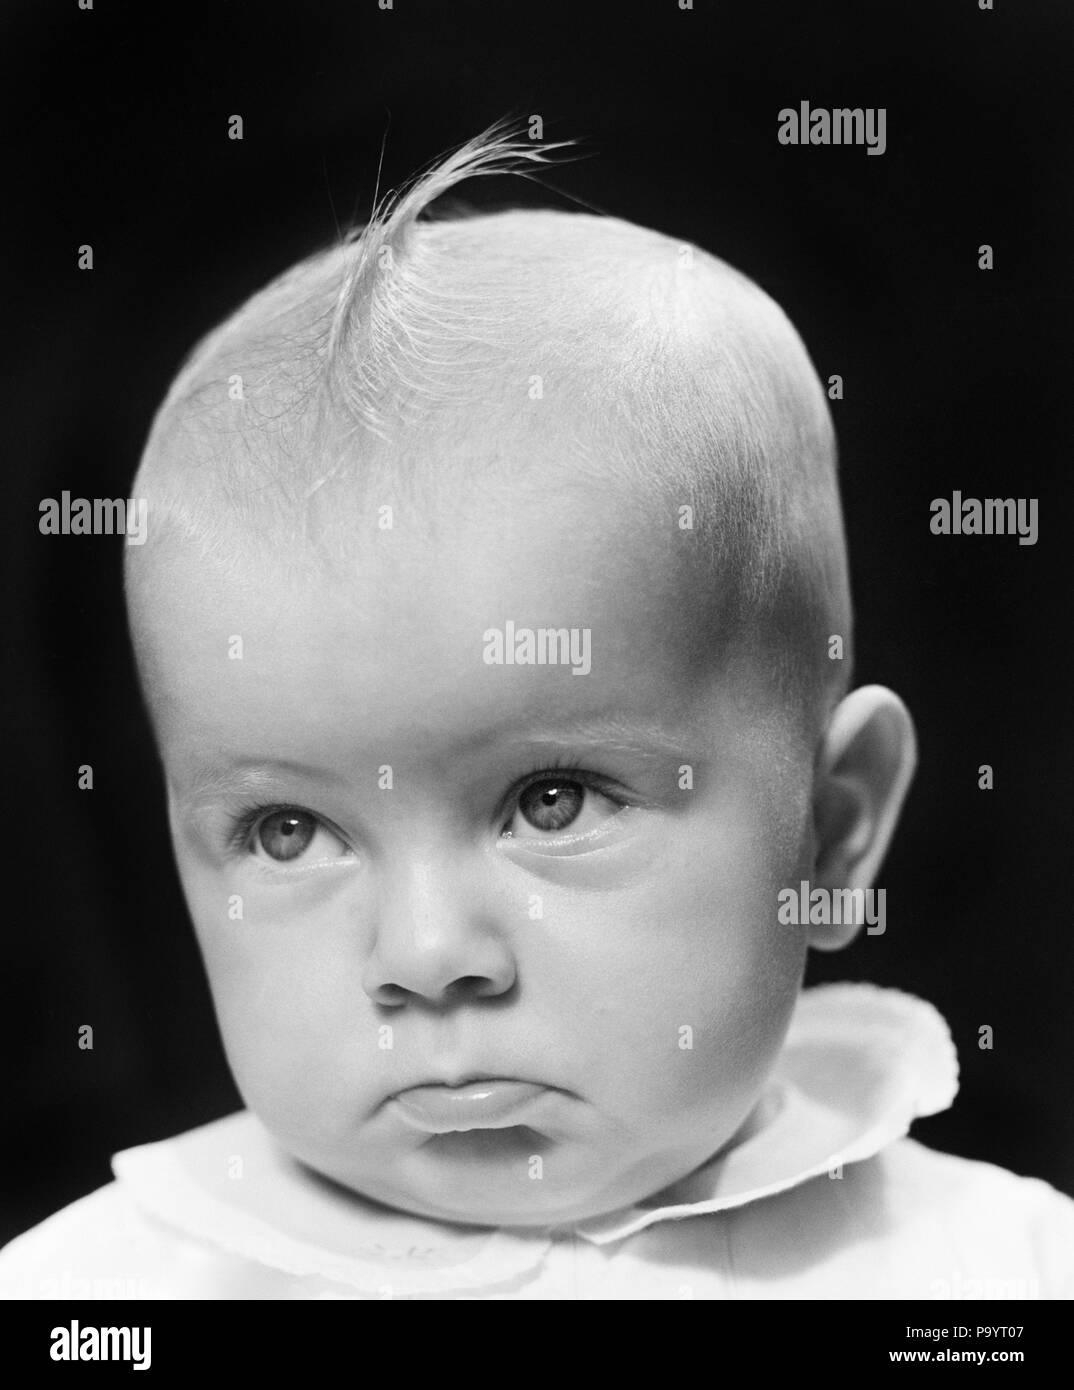 1940s BABY GIRL WITH TUFT OF BLONDE HAIR LOOKING VERY SAD - b165 HAR001 HARS VERY HEAD AND SHOULDERS POUTING CONCEPTUAL FORLORN POUT TUFT EMOTION JUVENILES MISERABLE BABY GIRL BLACK AND WHITE HAR001 OLD FASHIONED Stock Photo